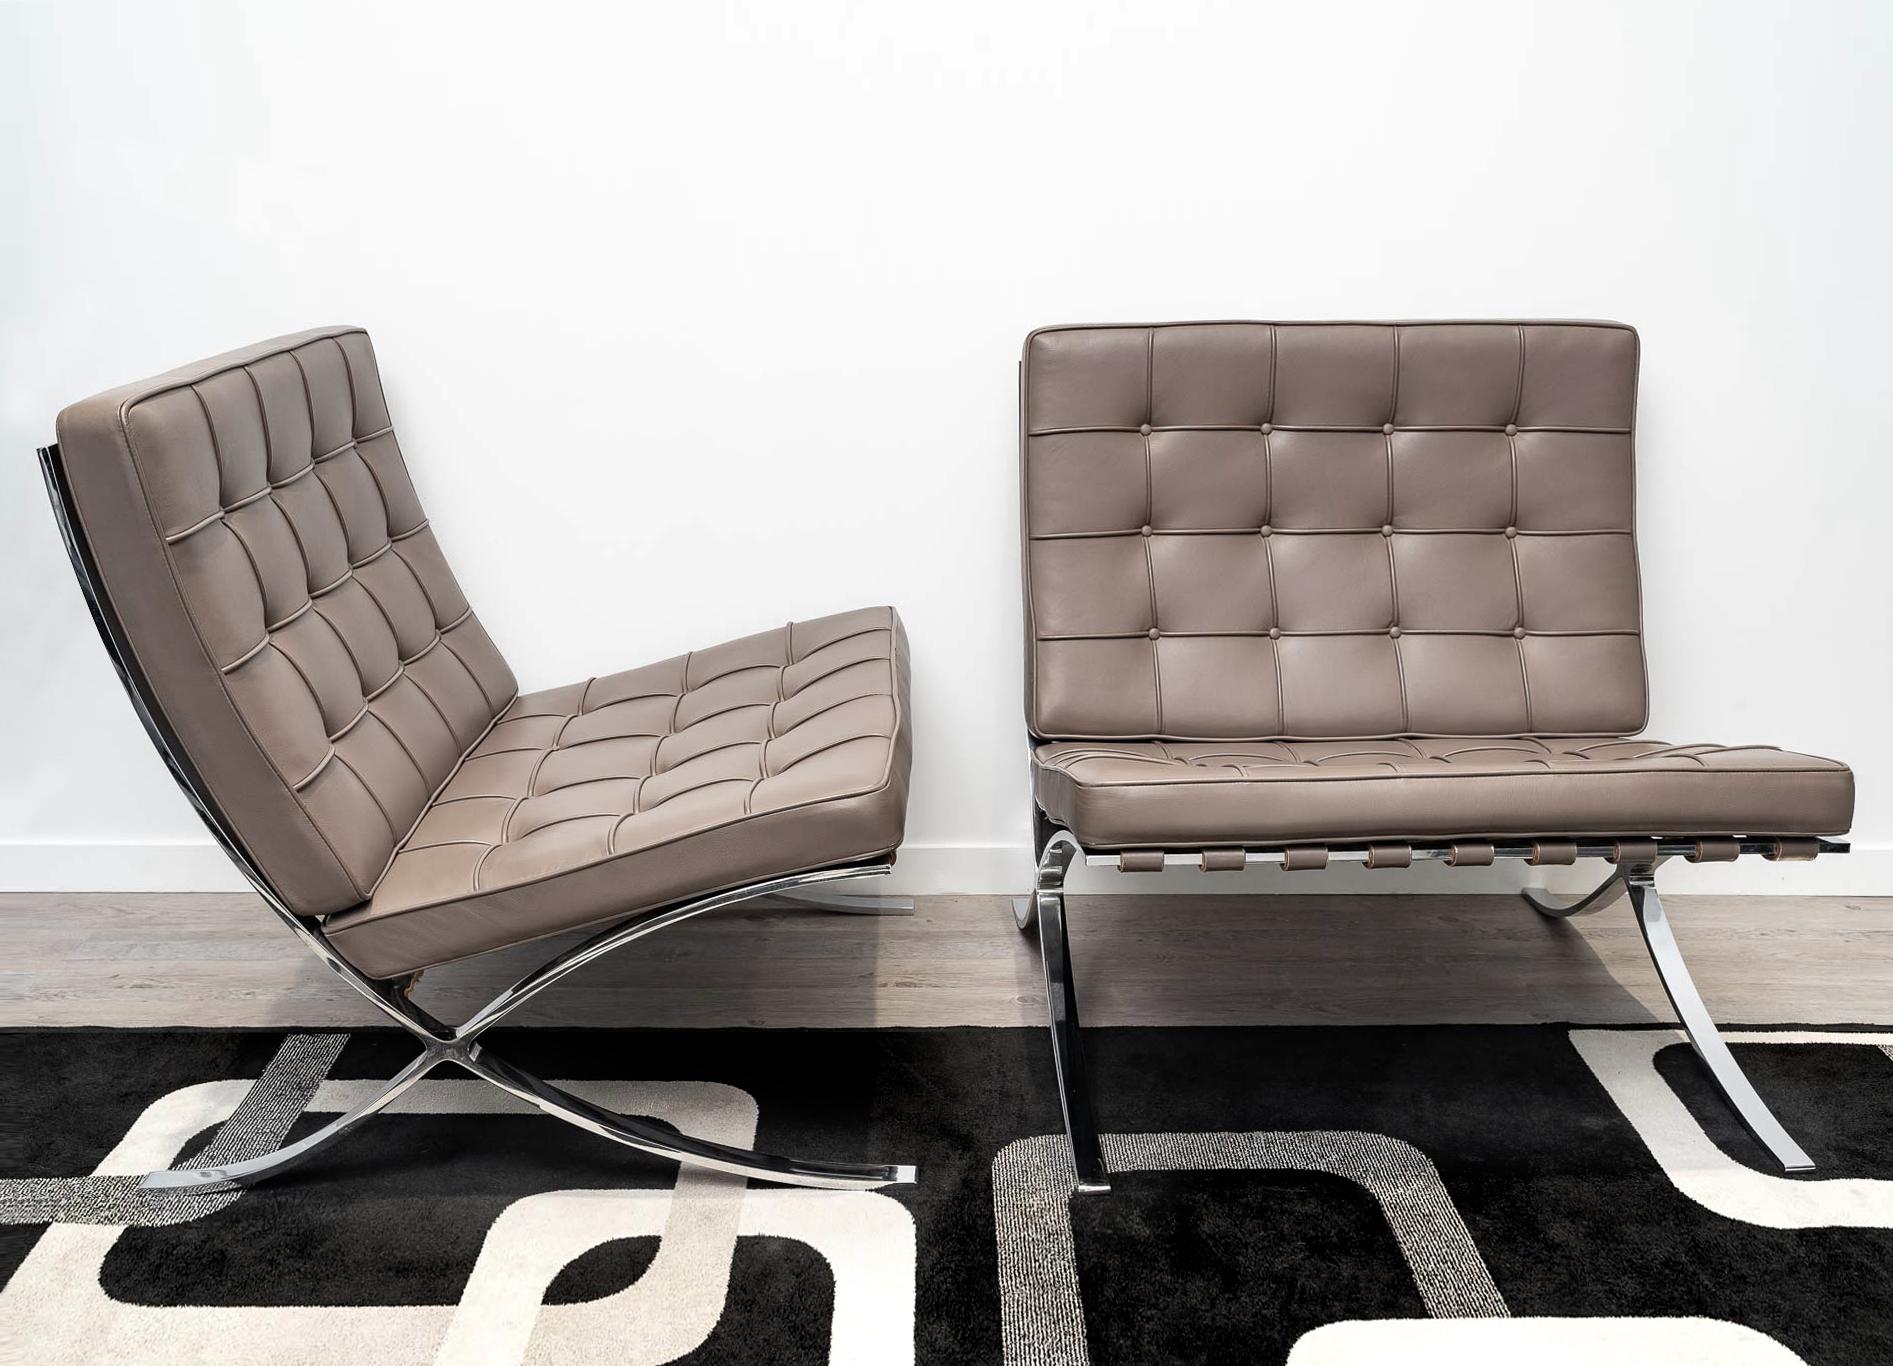 Pair of authentic barcelona low chairs, designed by Mies Van Der Rohe in 1929.
Recent Knoll edition in sabrina leather, the most high-end finish.
Color reference 